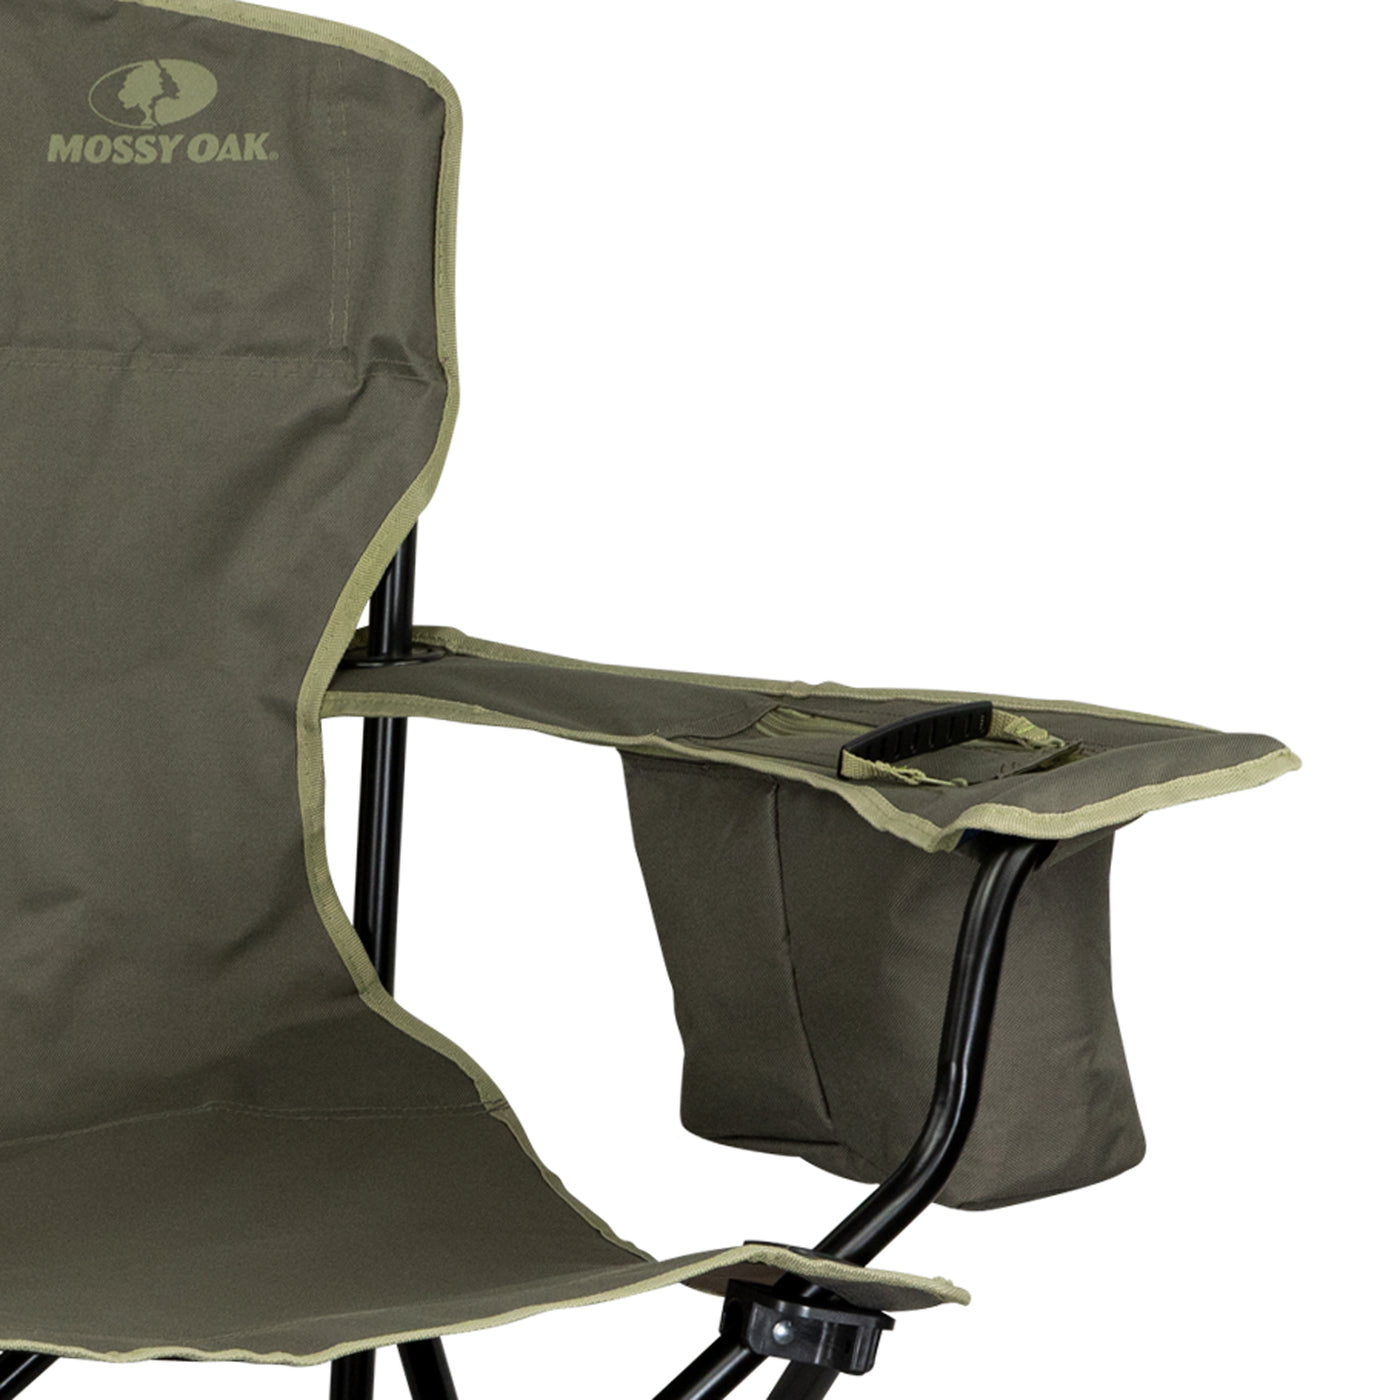 Mossy Oak Deluxe Folding Camping Chair Cooler Pocket 